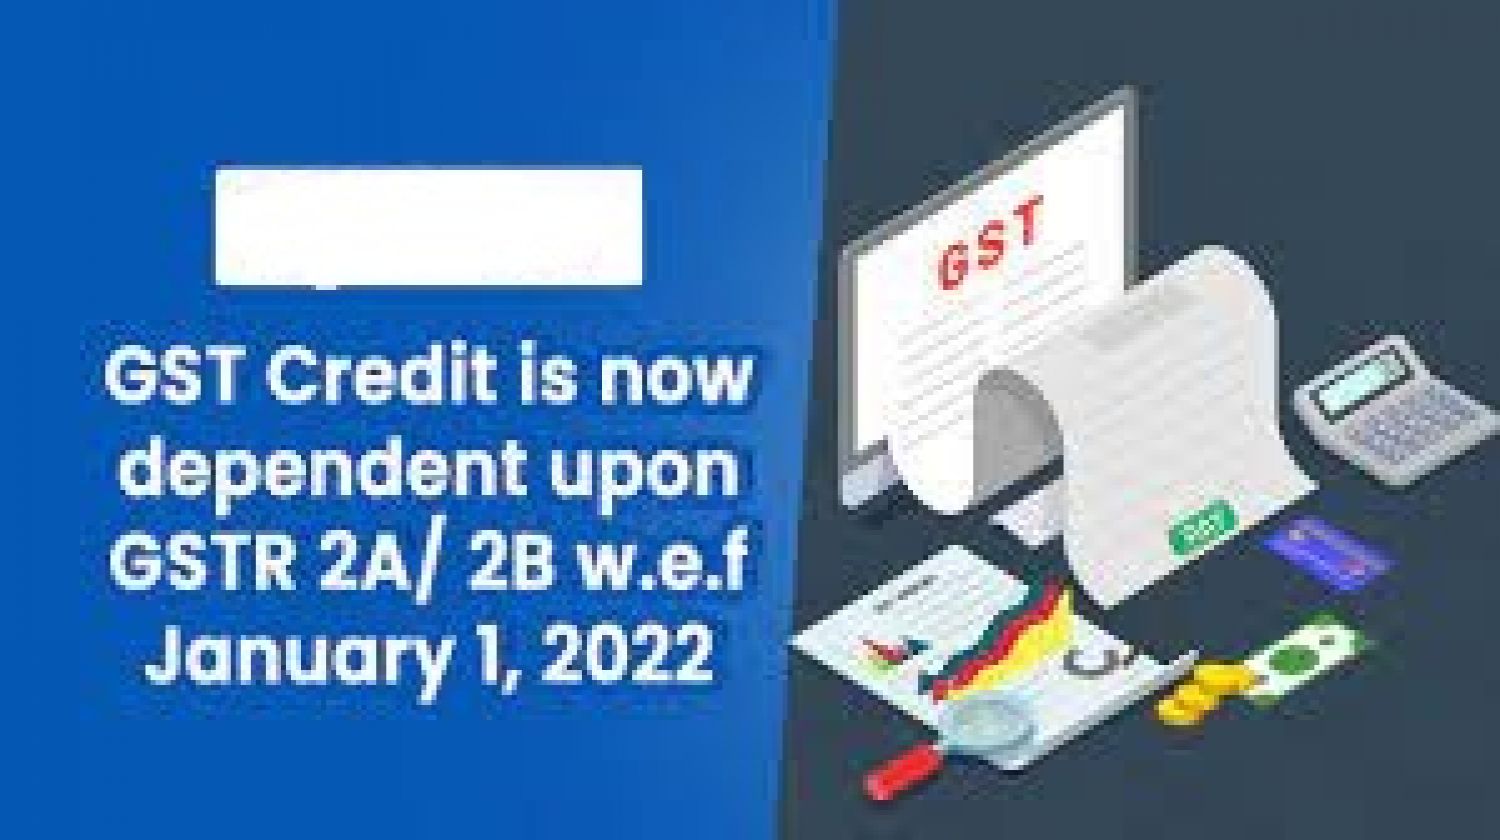 GST ITC available only when reflected in GSTR 2B/2A w.e.f. 01-01-2022